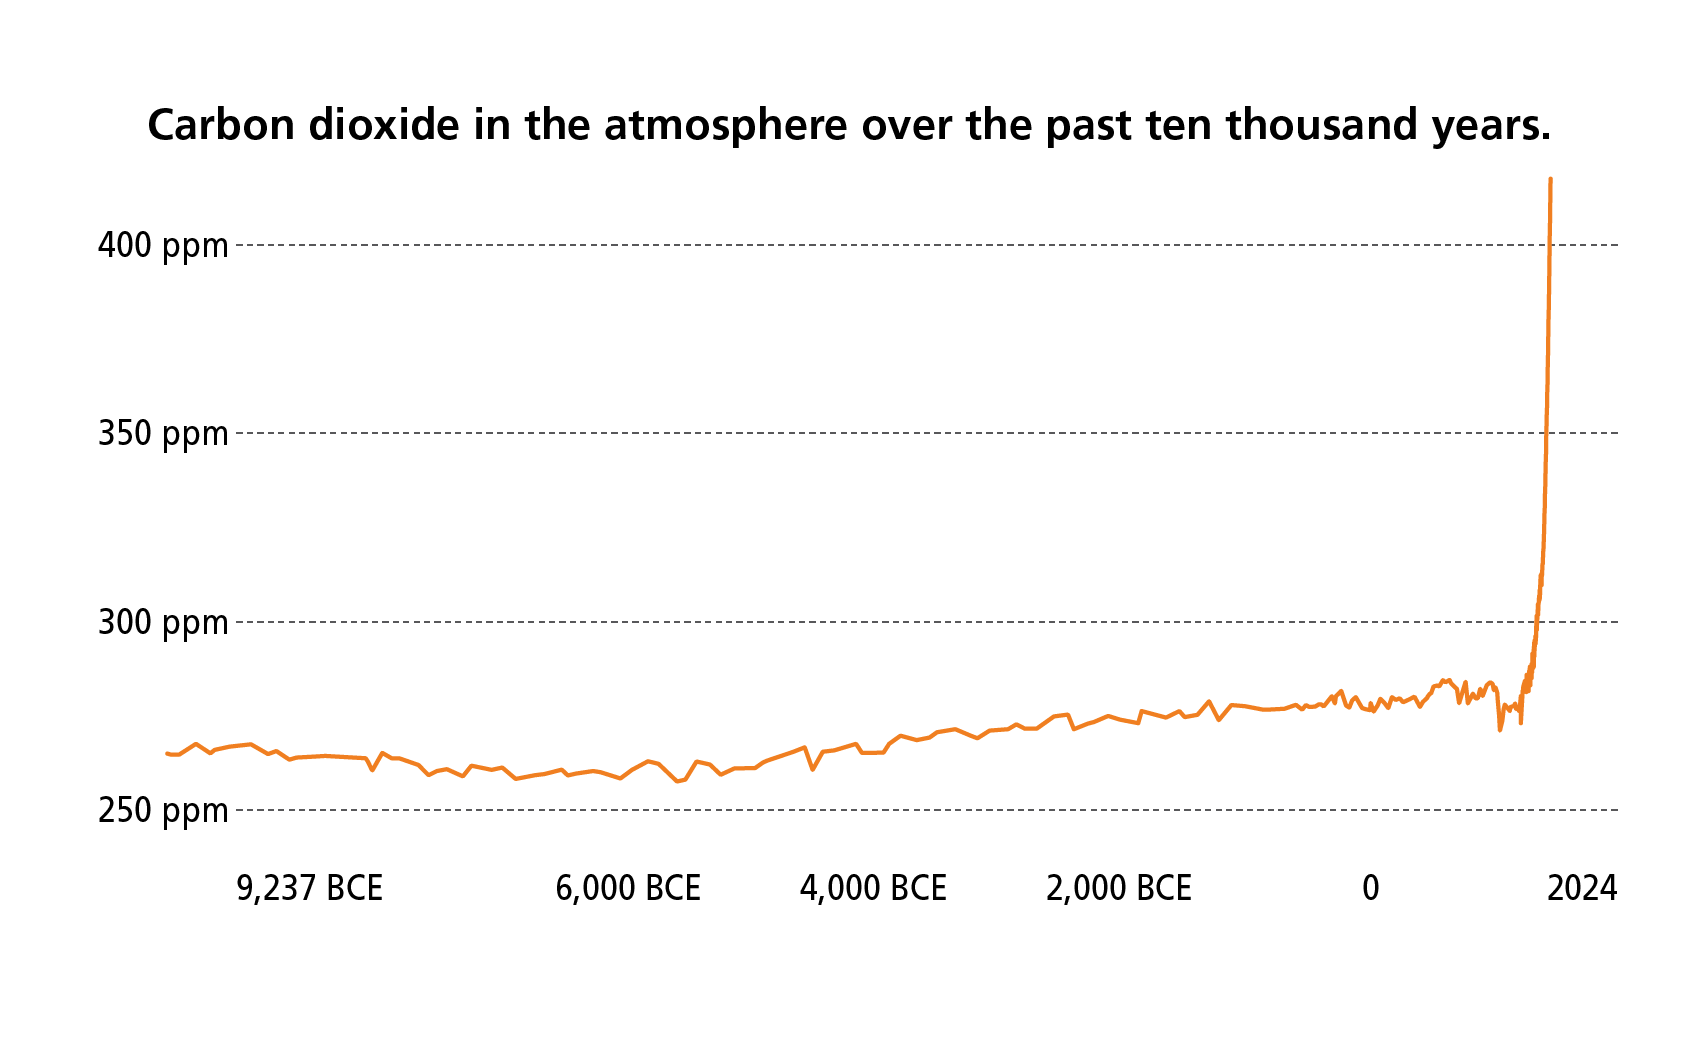 A line graph of atmospheric carbon dioxide rising abruptly in orange. Years are indicated on the x axis and amount of co2 on the y axis.